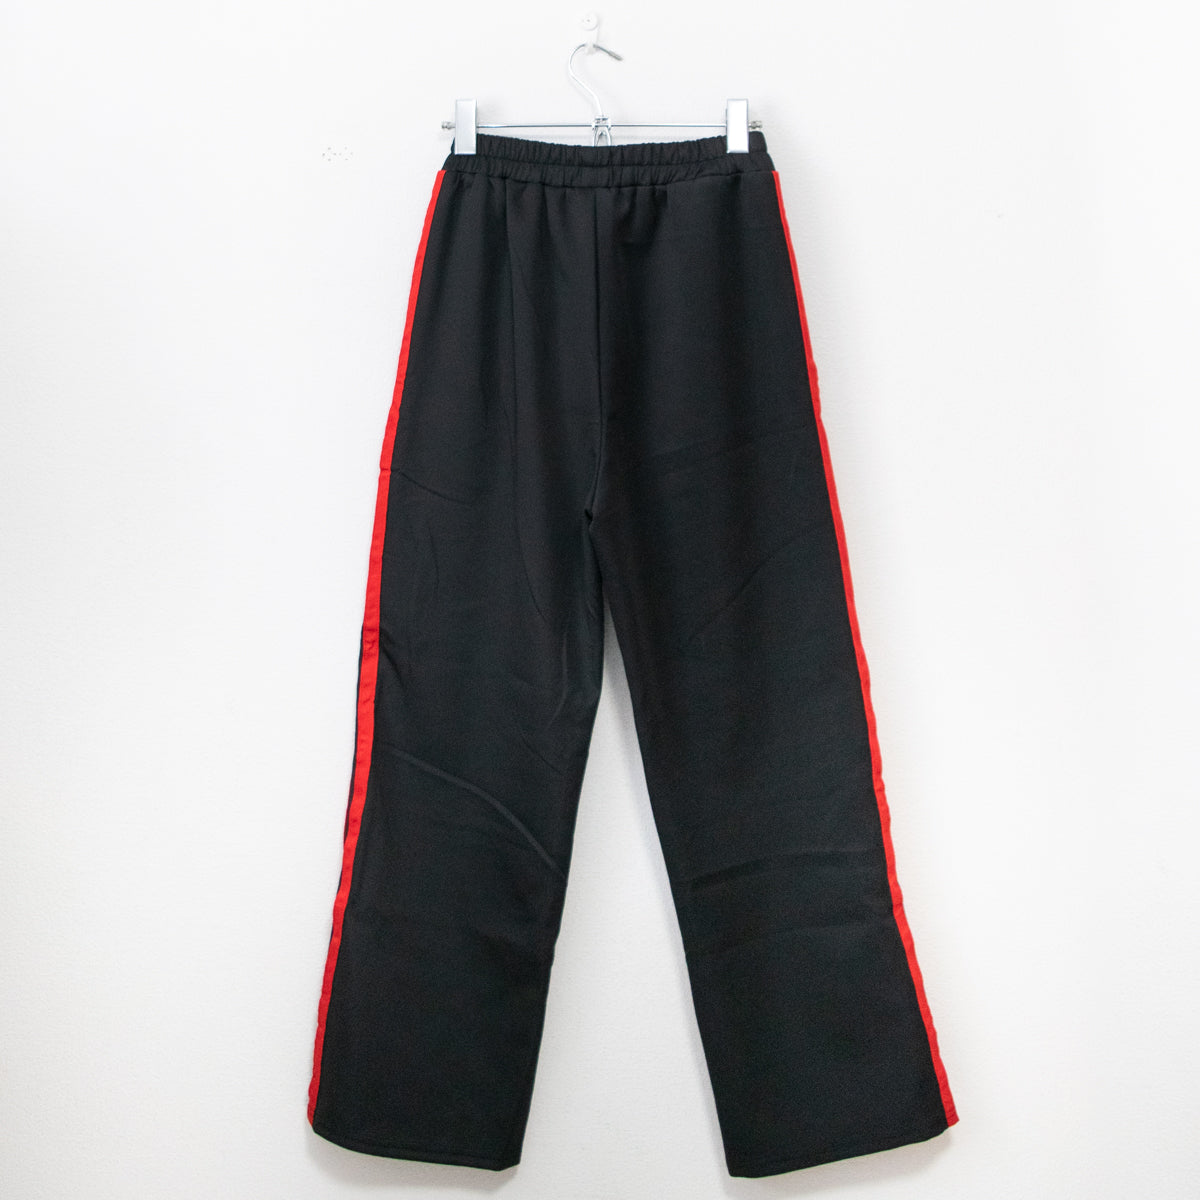 ACDC Rag Wing Heart Side Line Jersey Pants Black - YOUAREMYPOISON